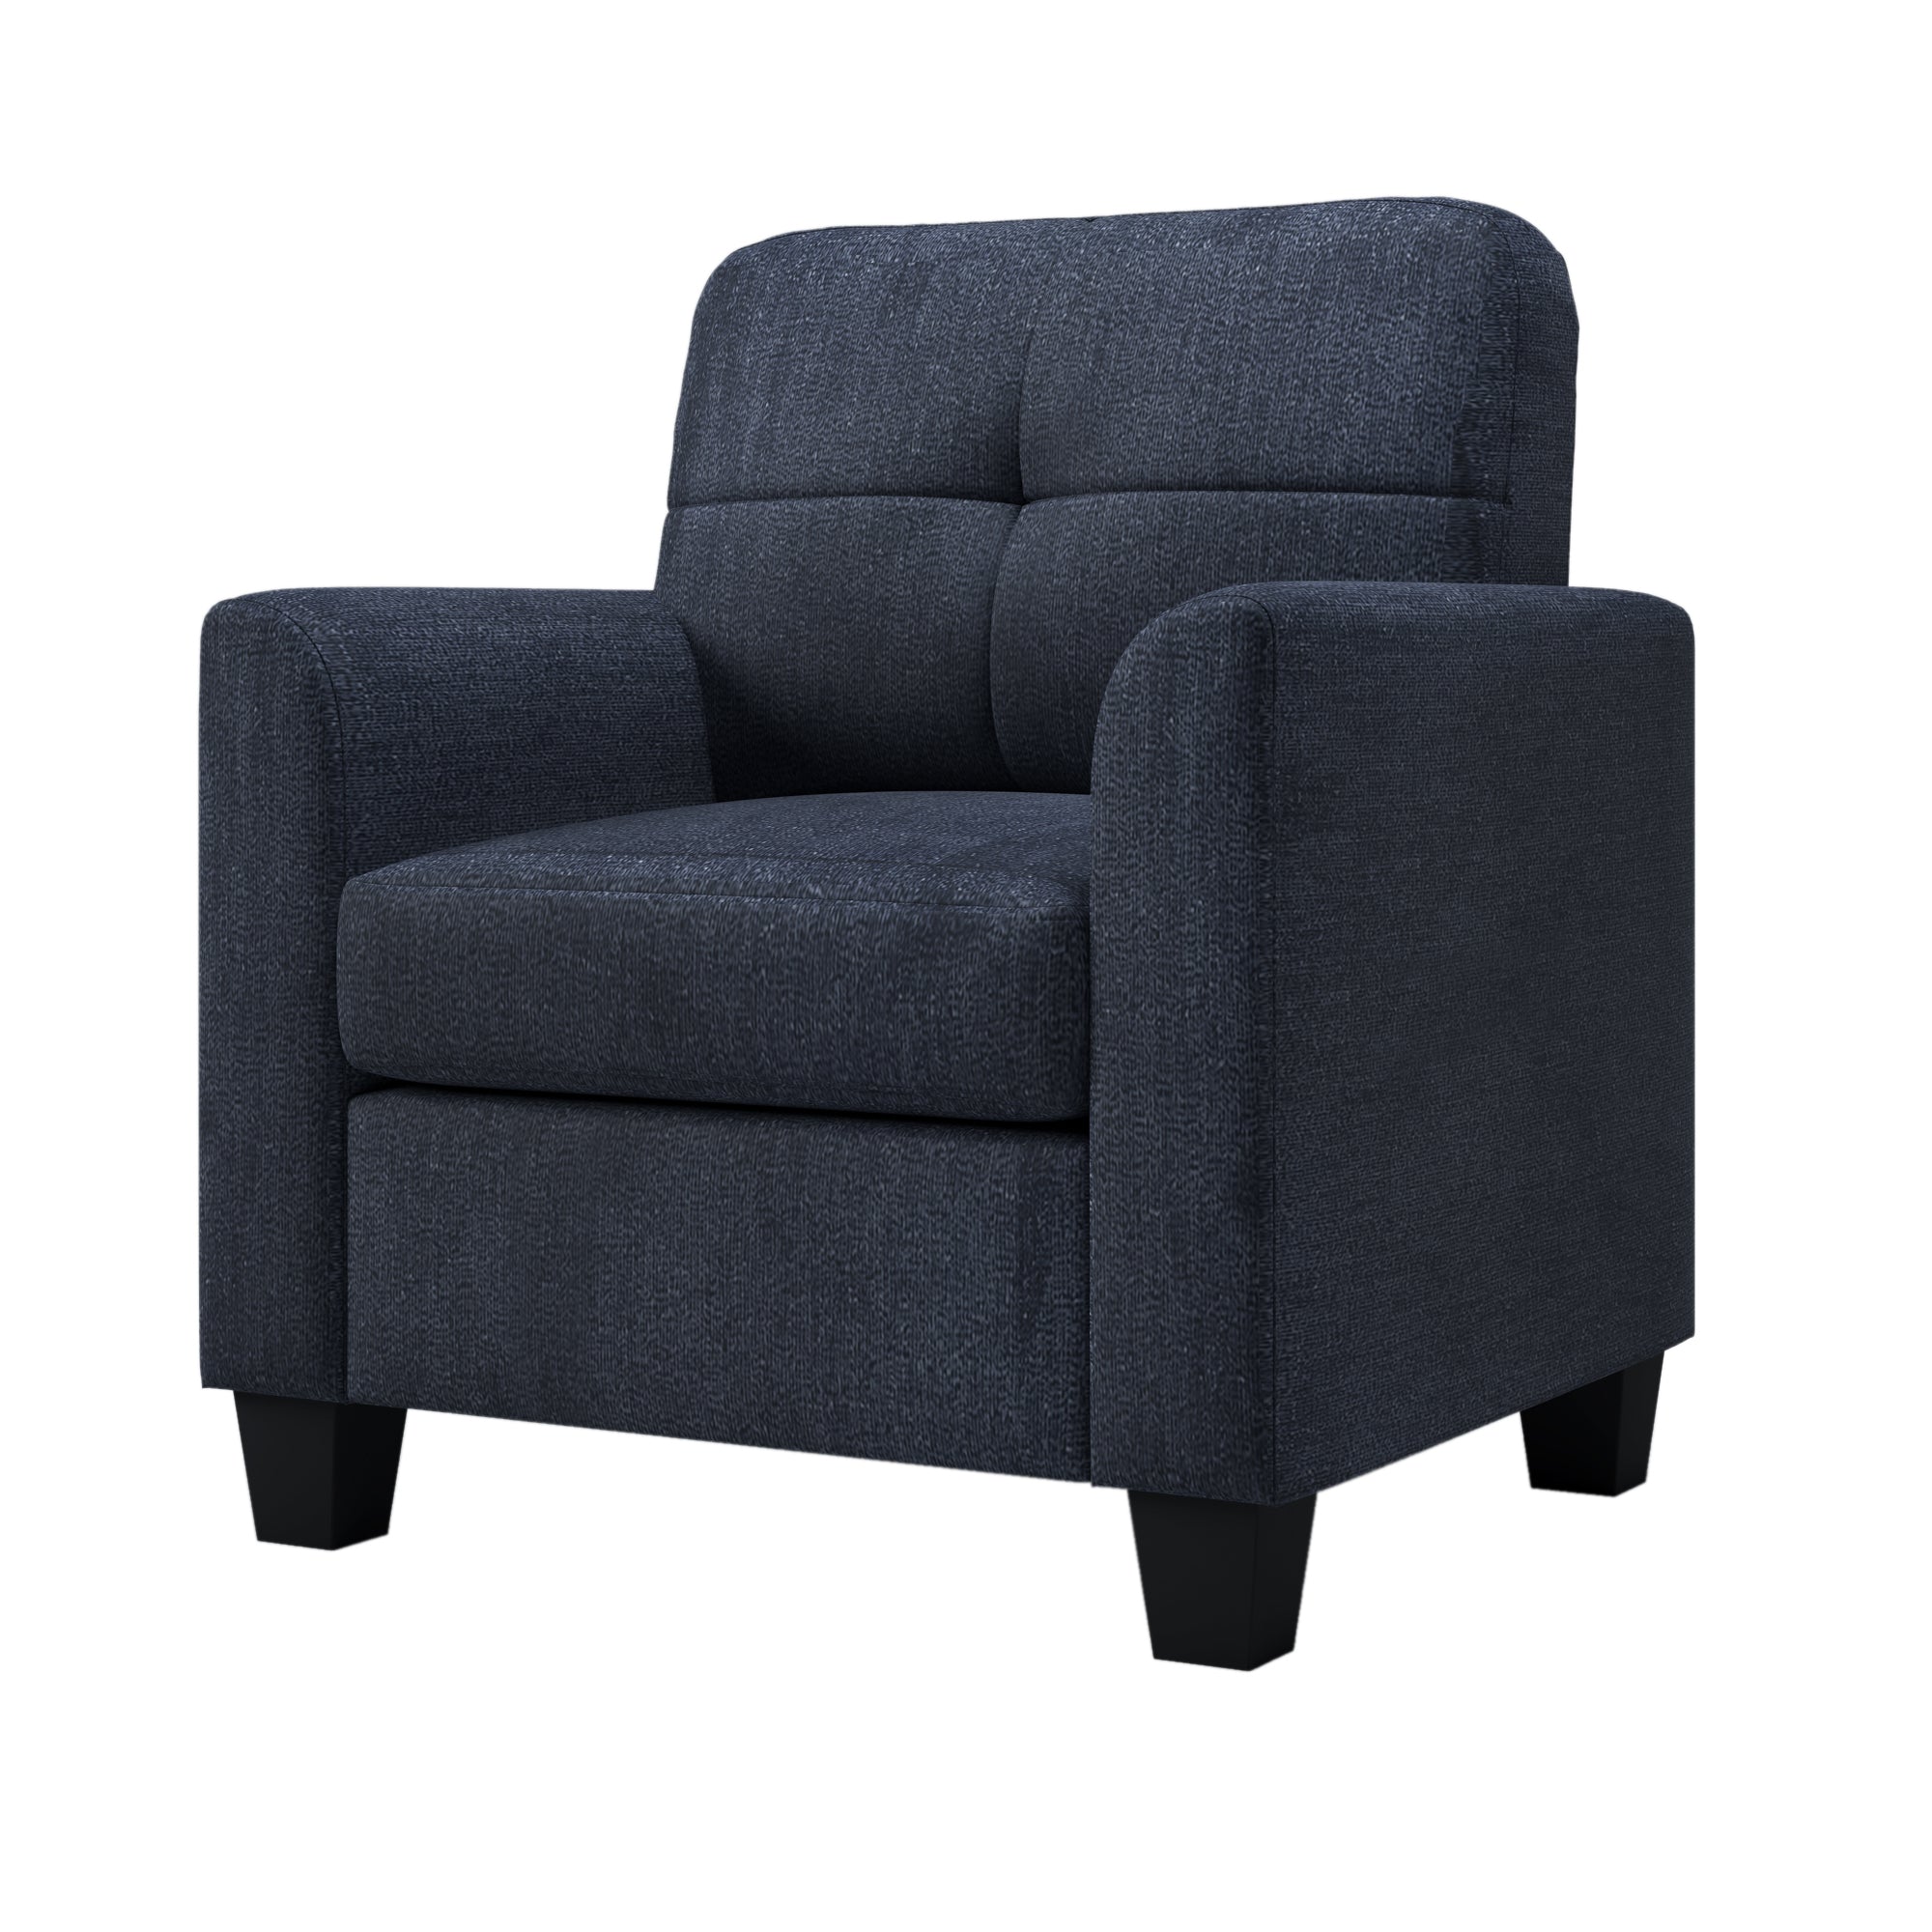 Mid Century Modern Accent Chair Cozy Armchair Button dark blue-primary living space-polyester